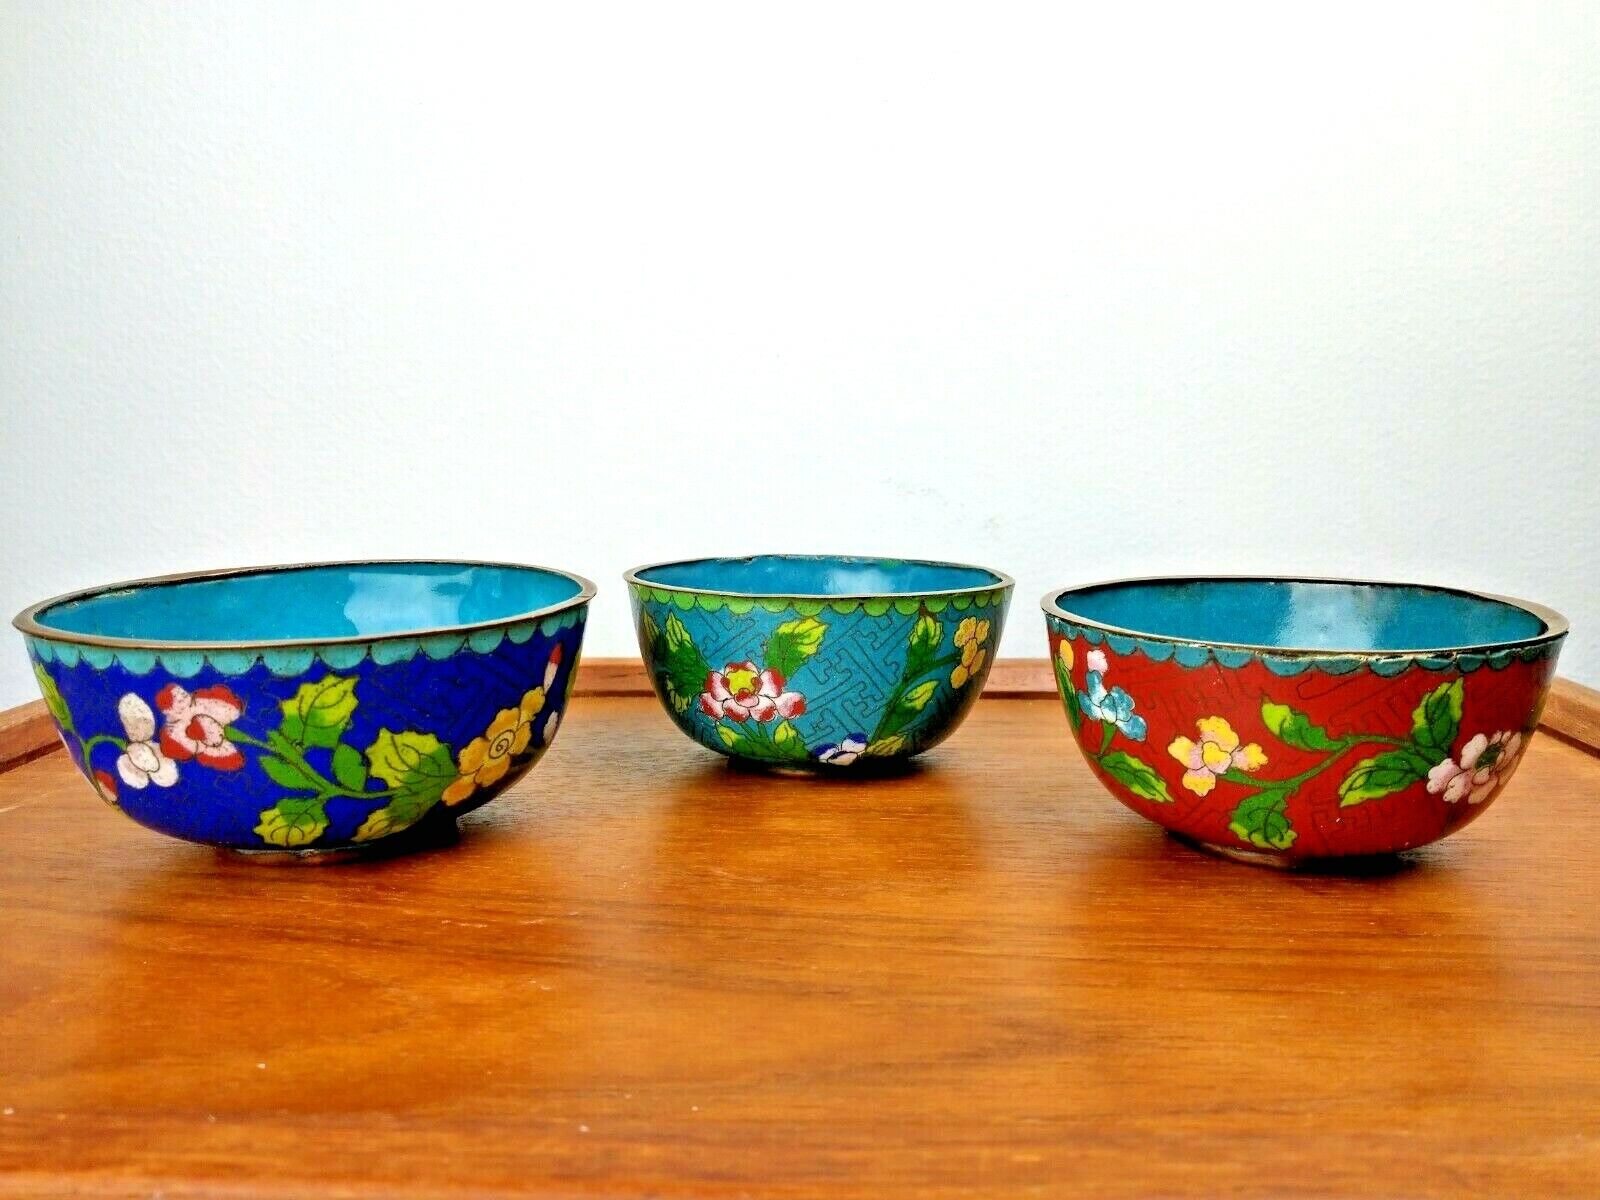 ANTIQUE CLOISONNE ENAMEL BOWL ASIAN FLOWER CHINESE DISH CHINA LOT OF 3  Без бренда